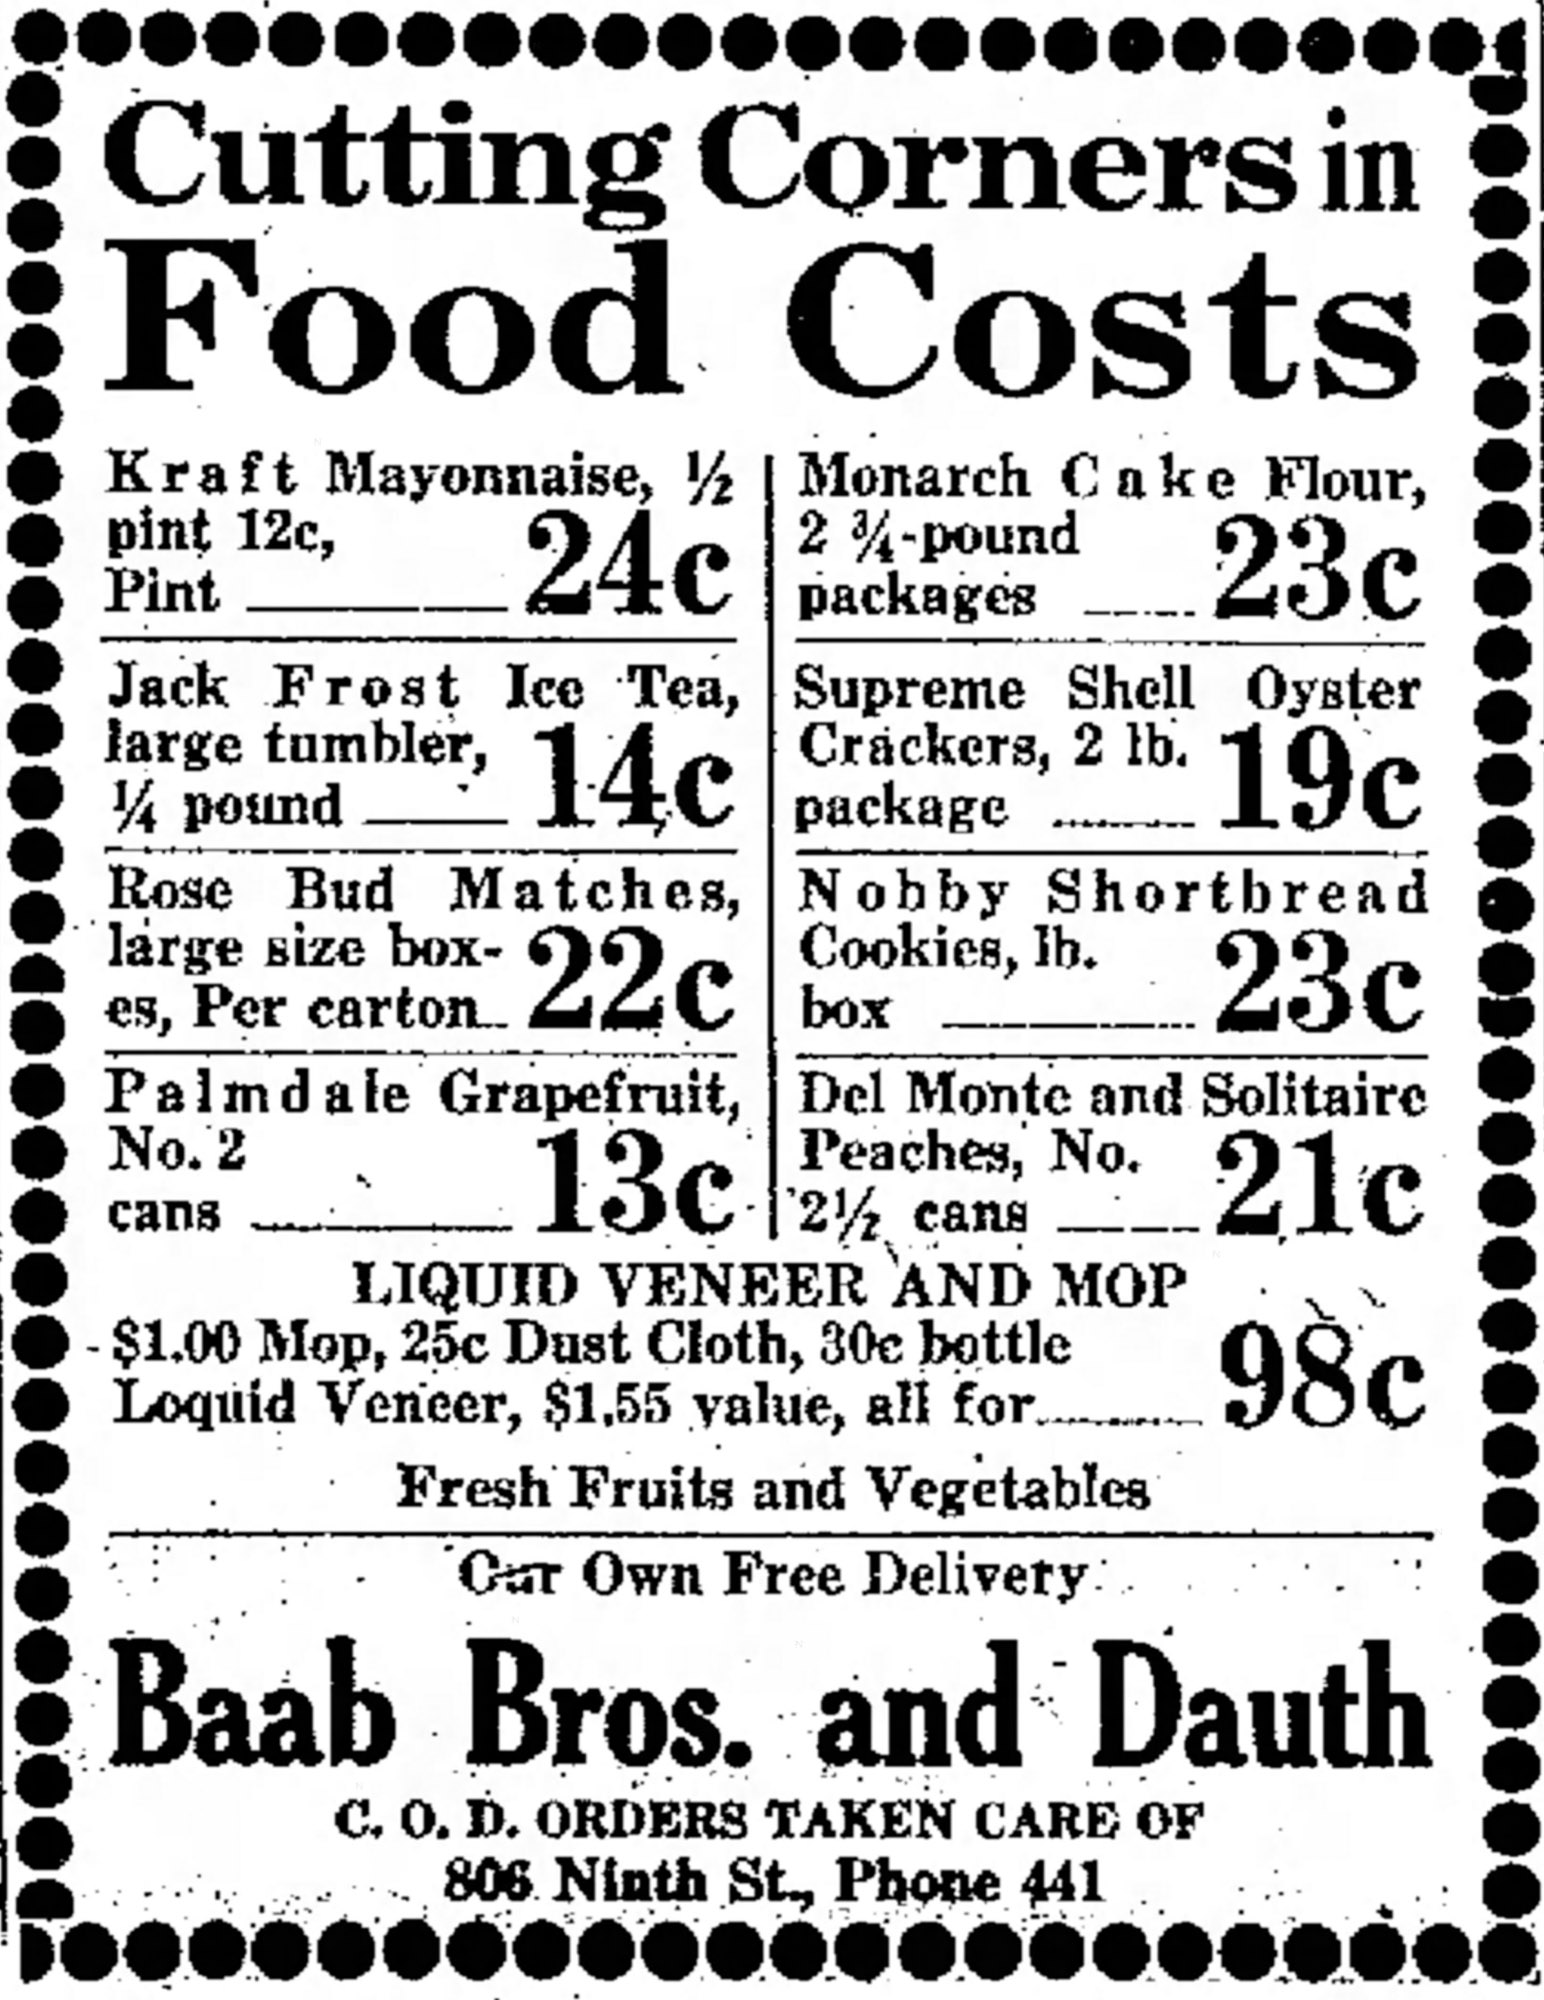 Dauth Family Archive - 1932-05-19 - Greeley Daily Tribune - Baab Bros and Dauth Advertisement